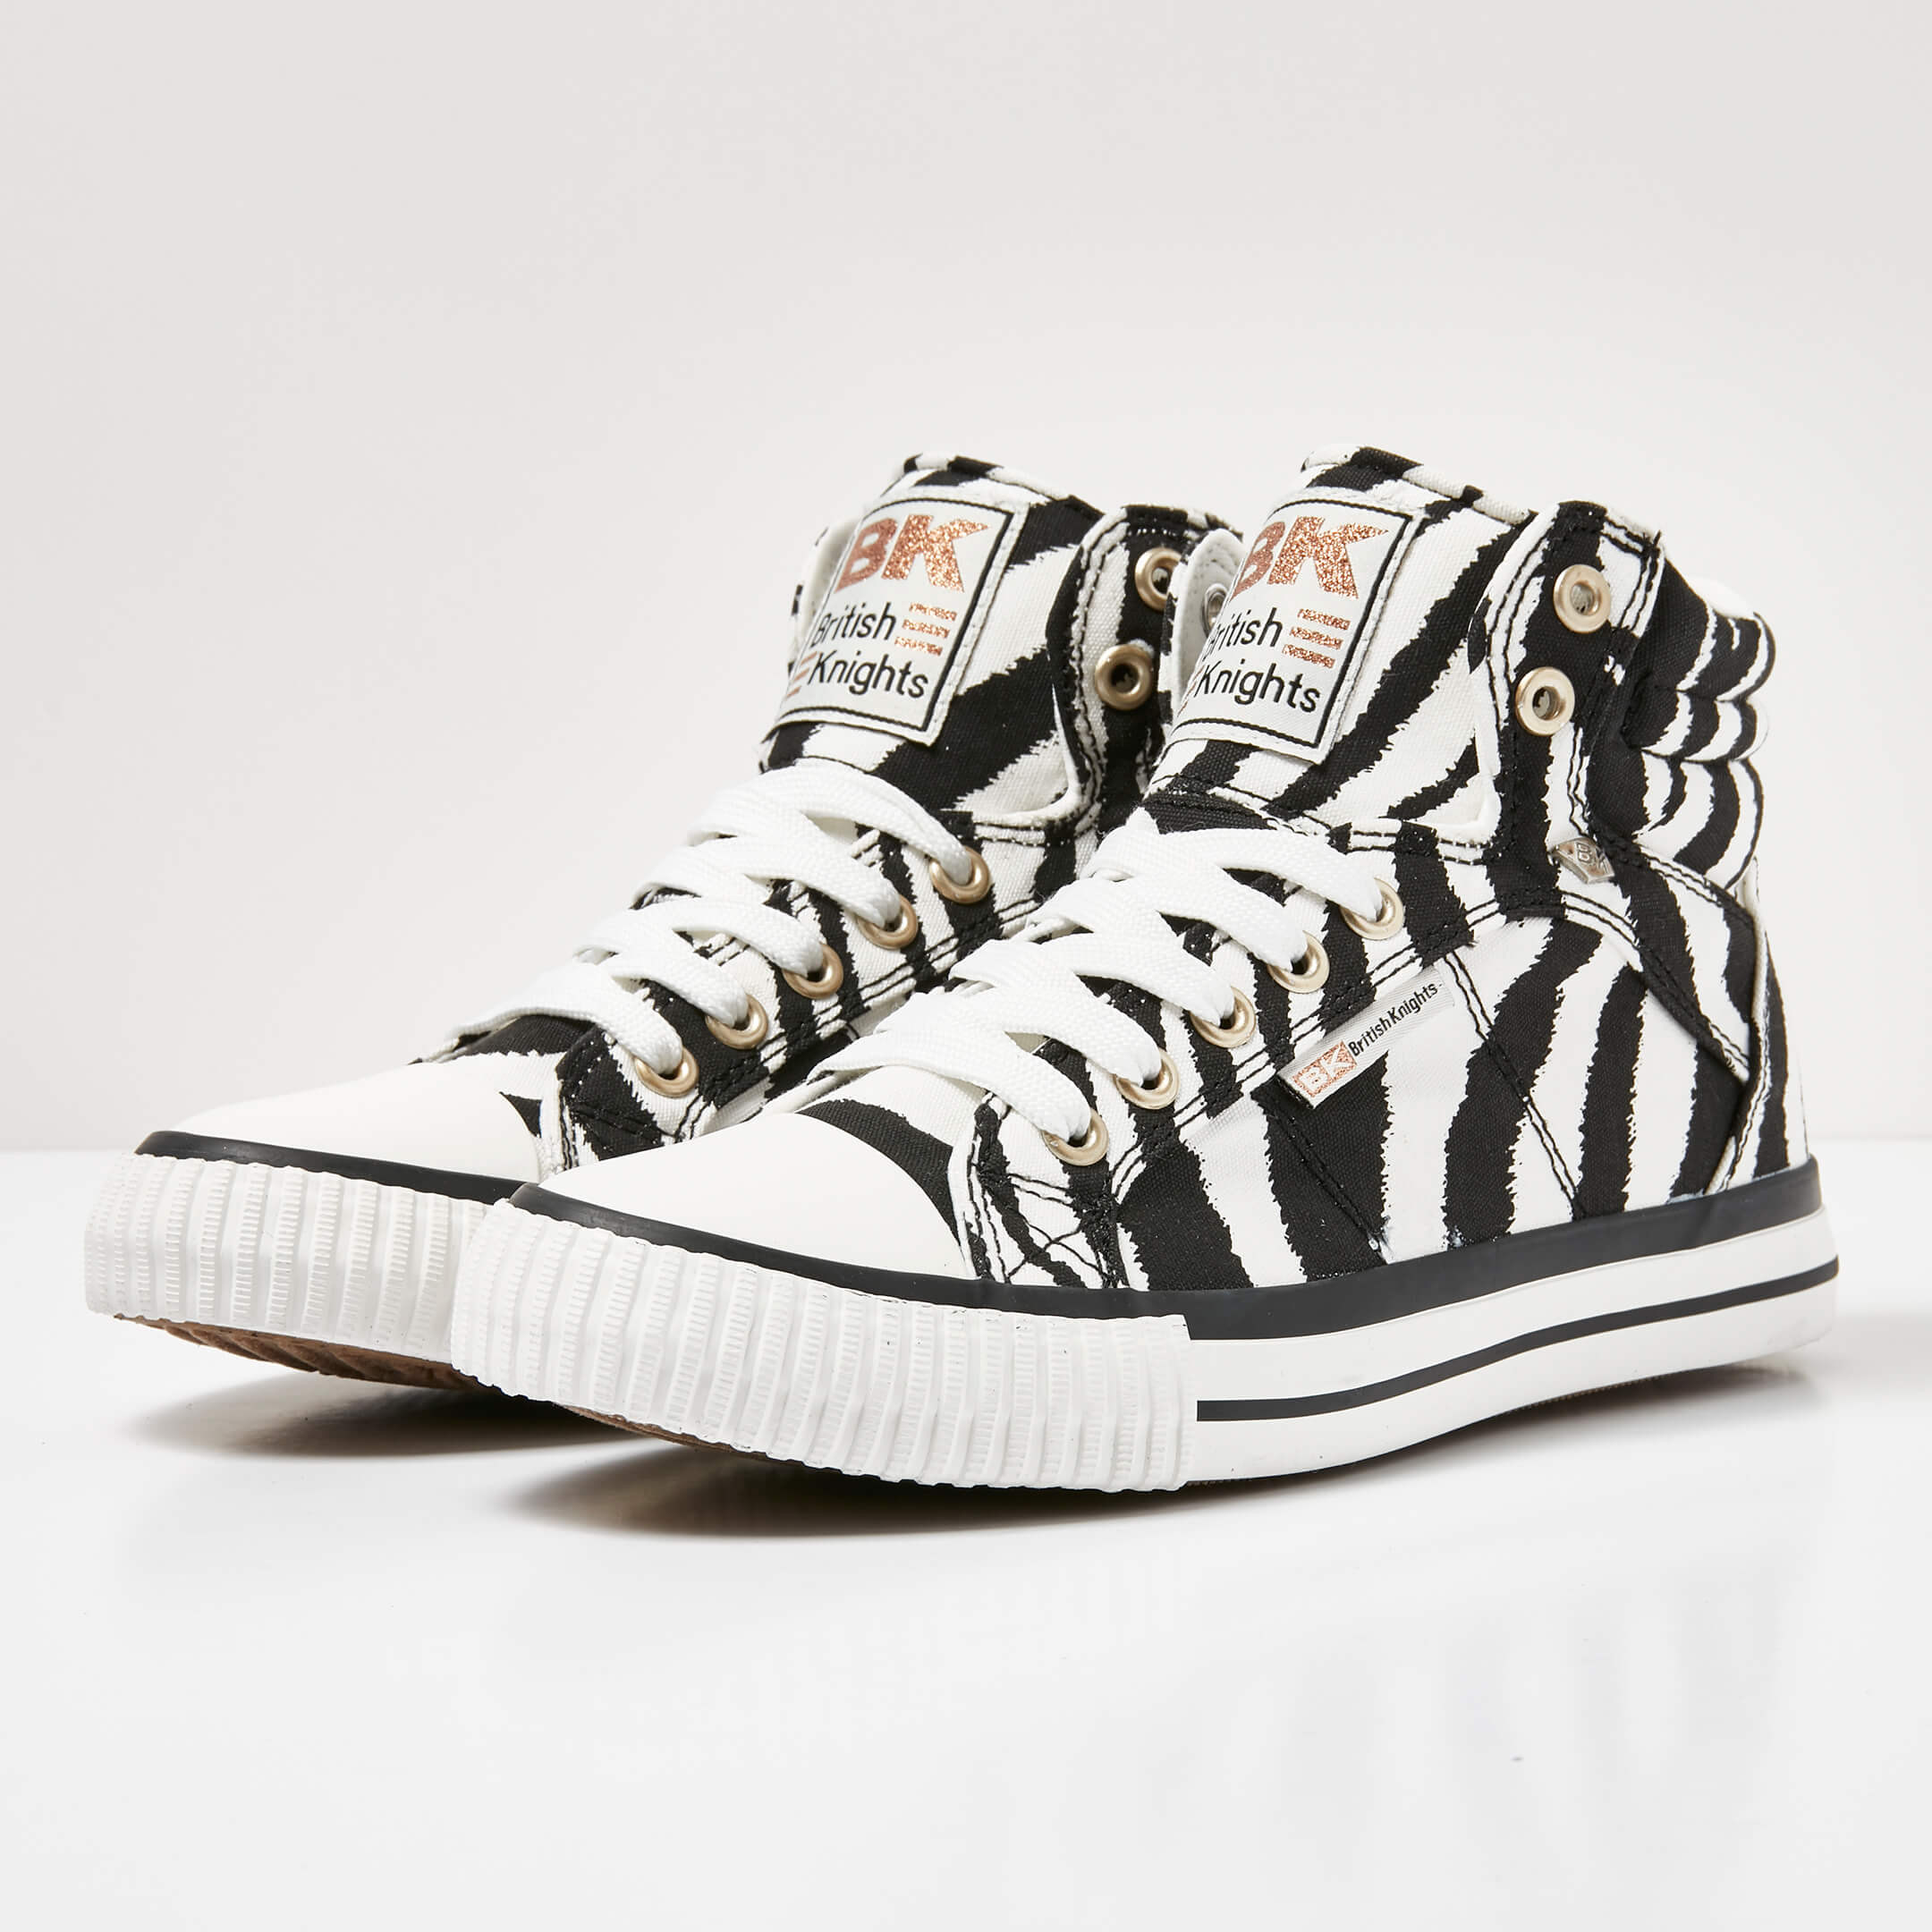 British Knights Sneaker Front view  B44-3790-05 DEE HIGH-TOP FEMALE